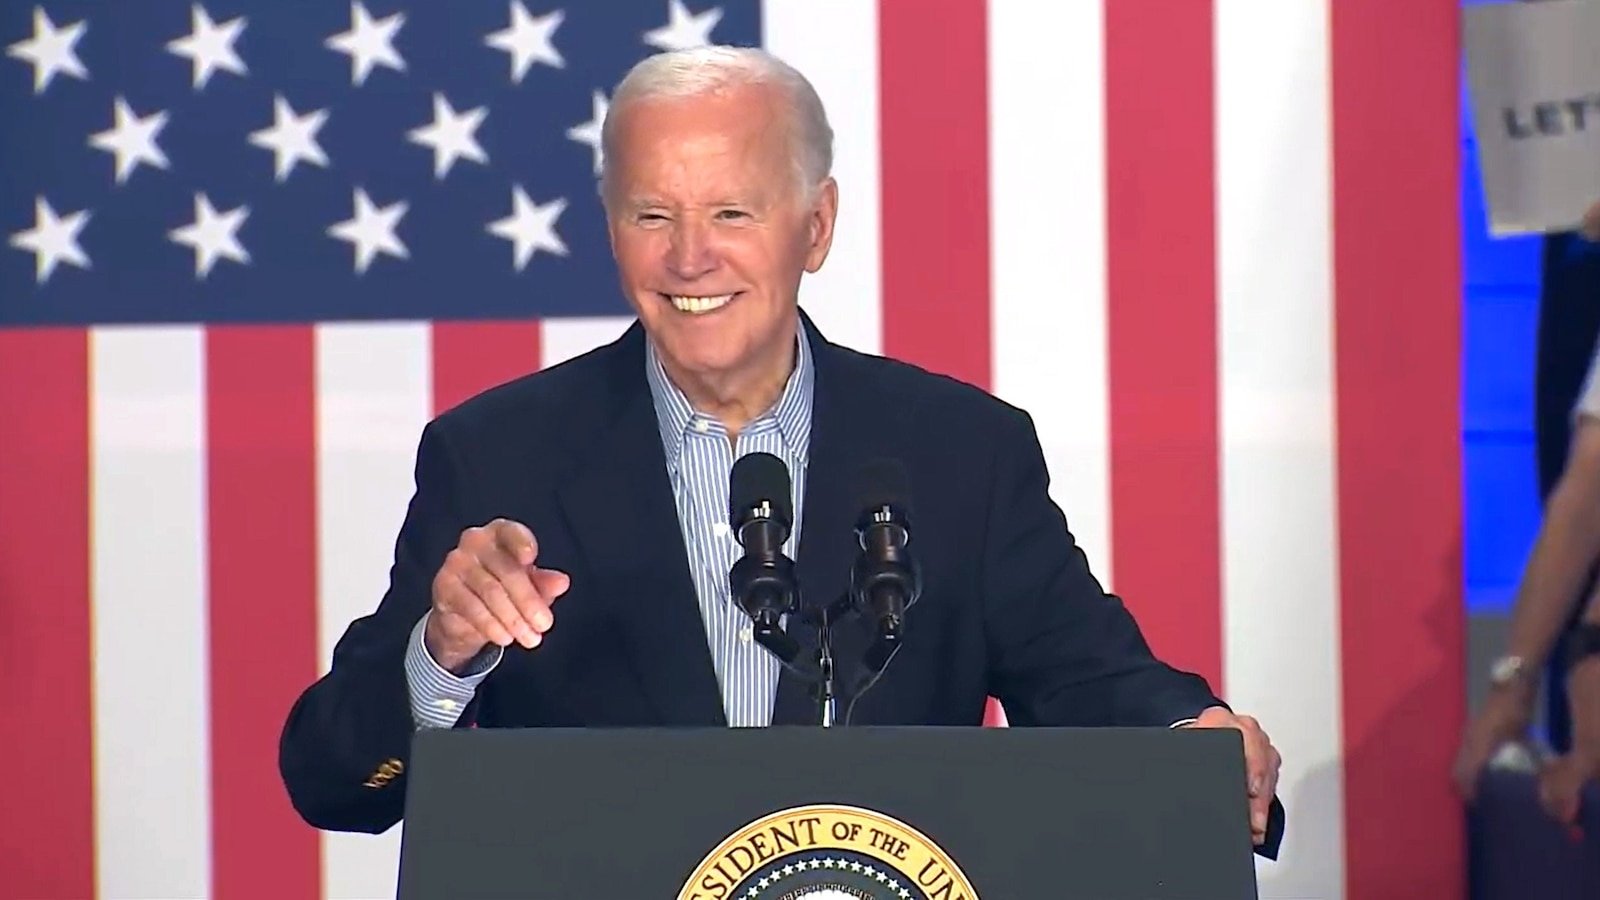 As Biden visits Wisconsin, Democratic voters want to evaluate him for themselves